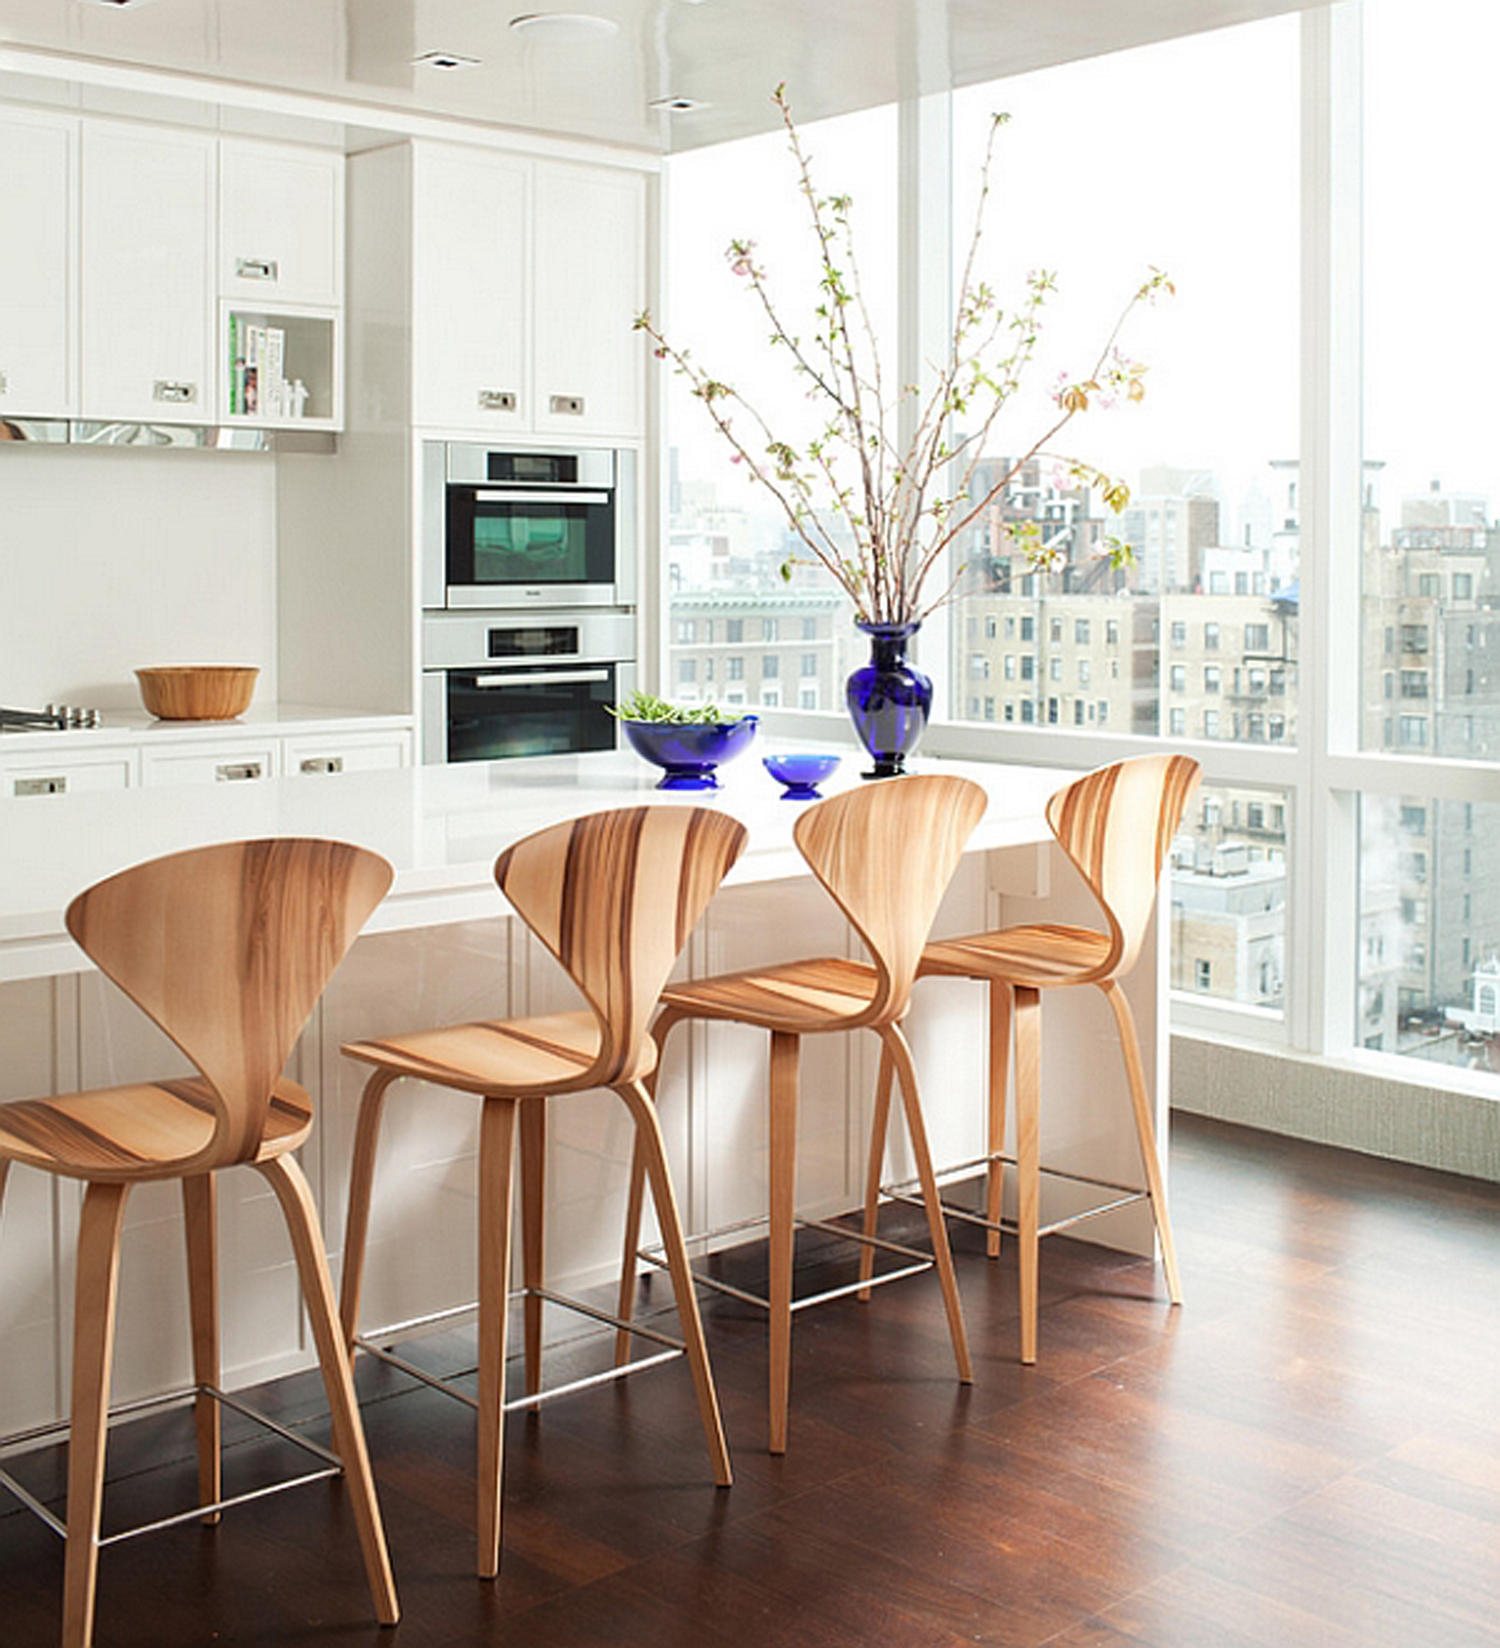 Wood barstools in white kitchen